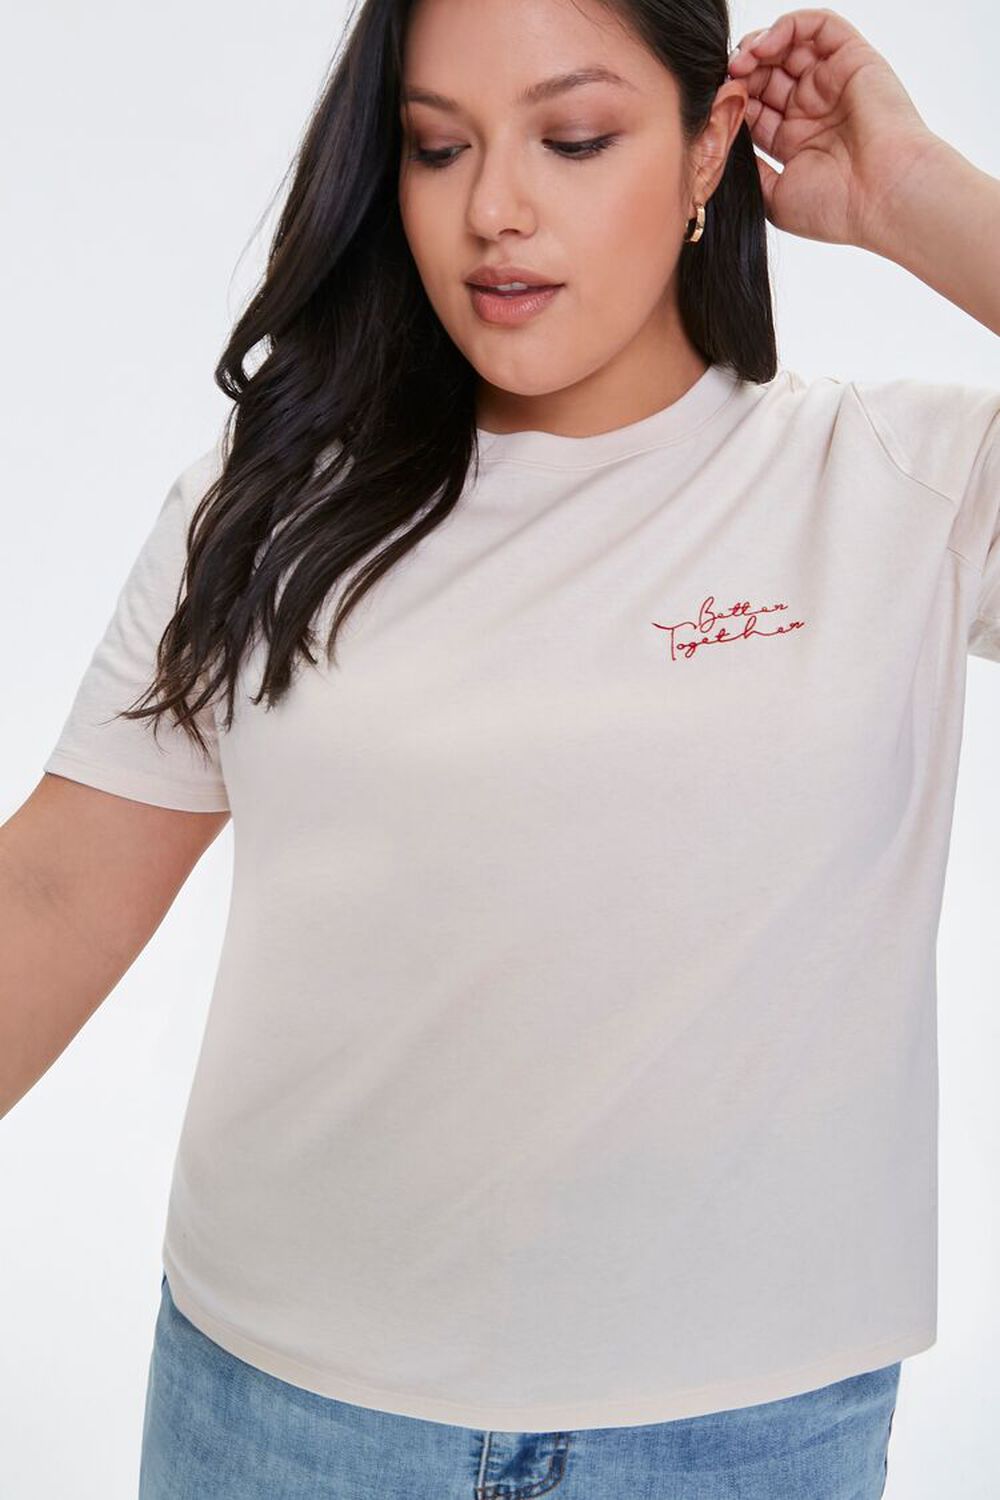 Plus Size Better Together Tee